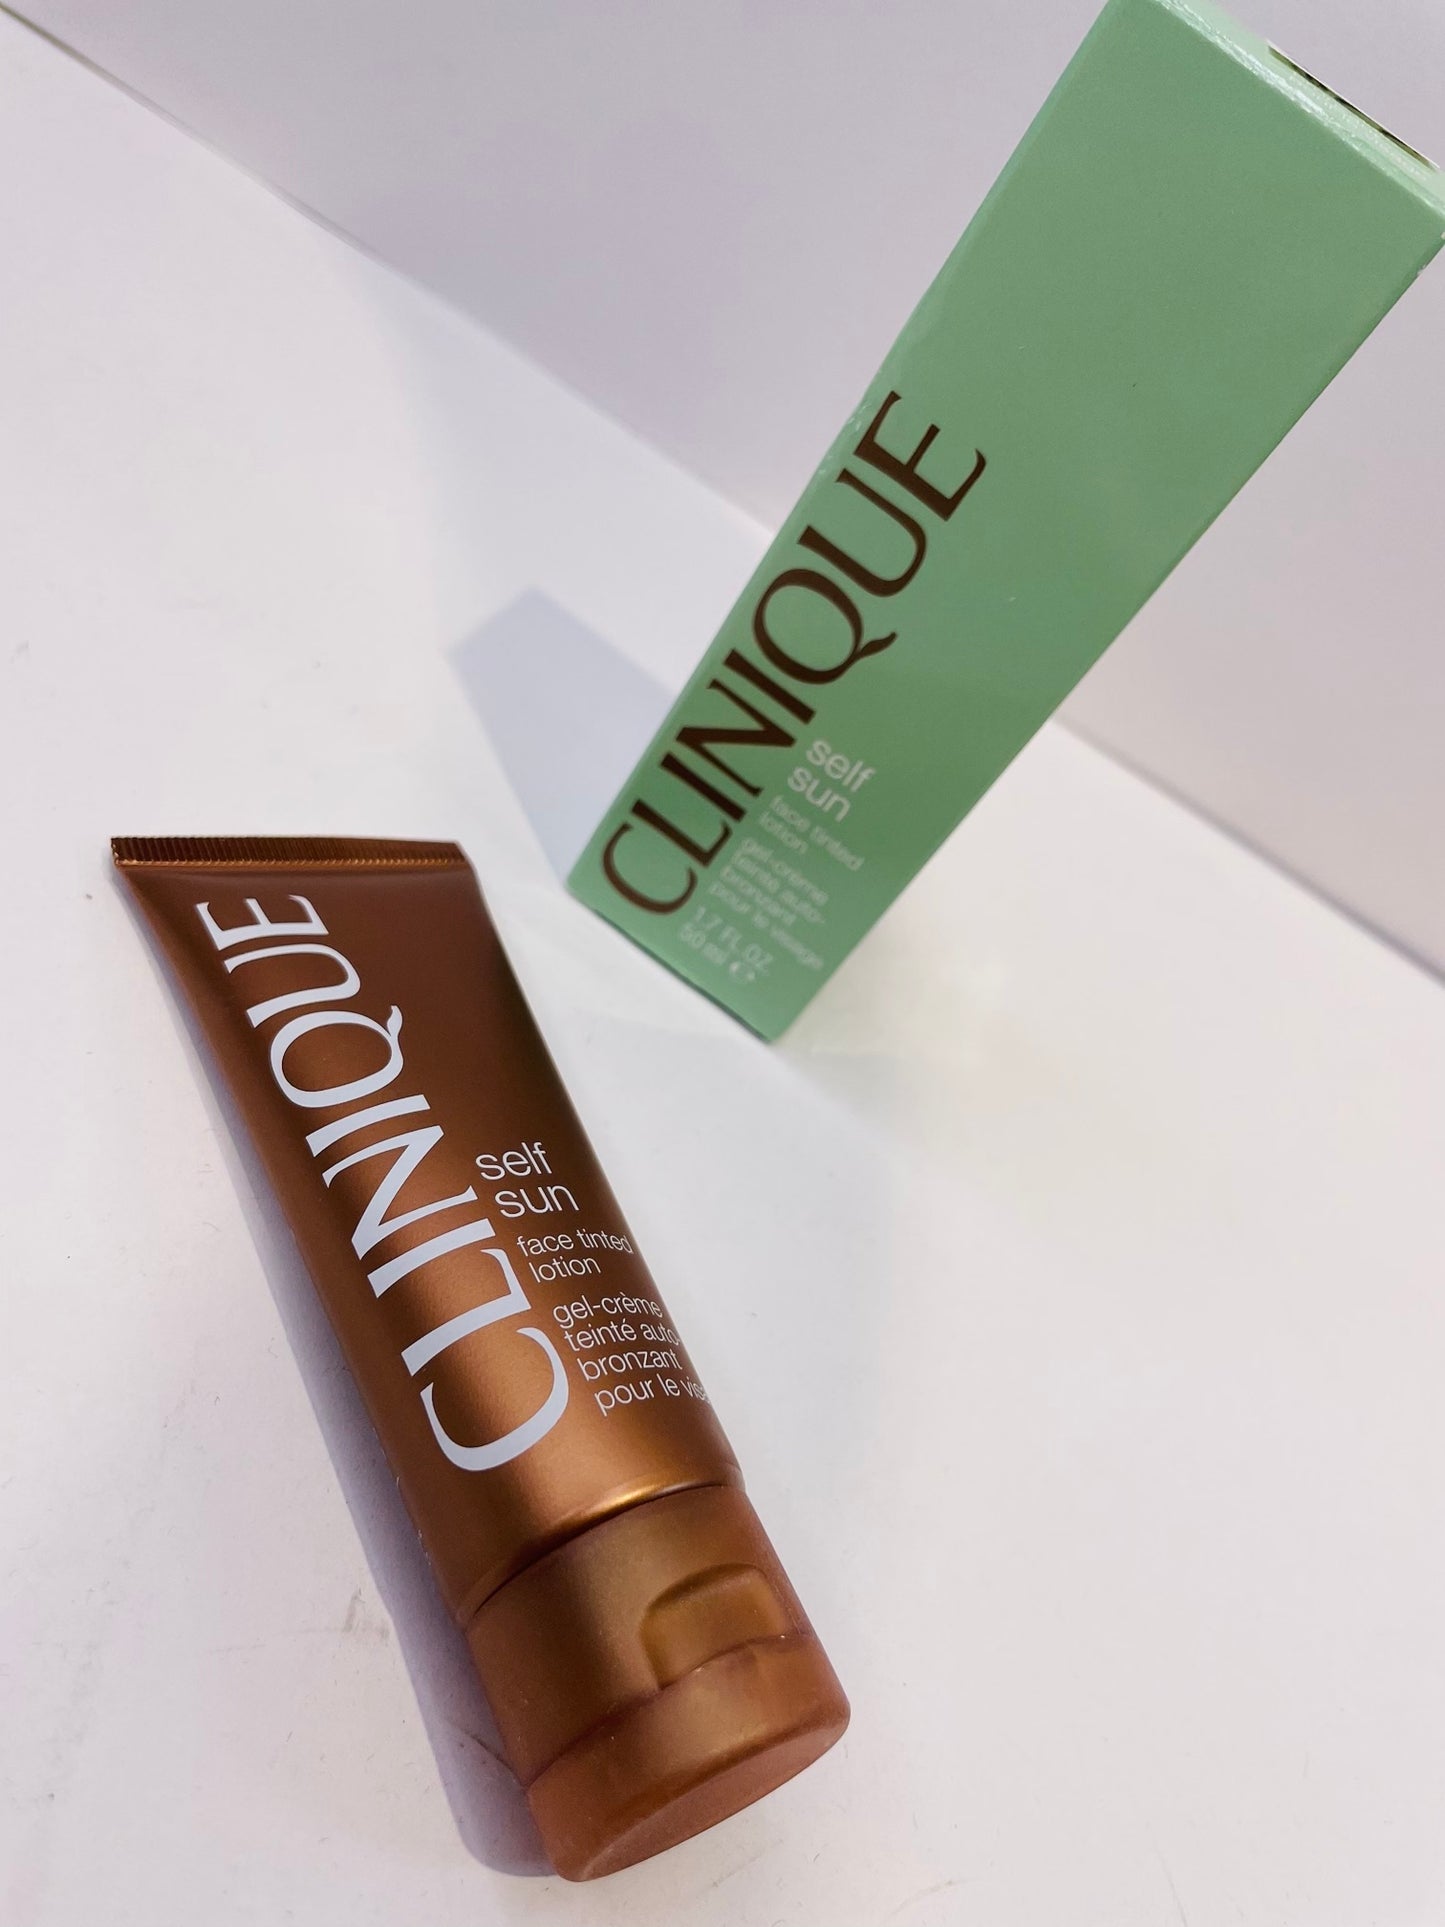 Clinique tanning lotion facial tinted lotion